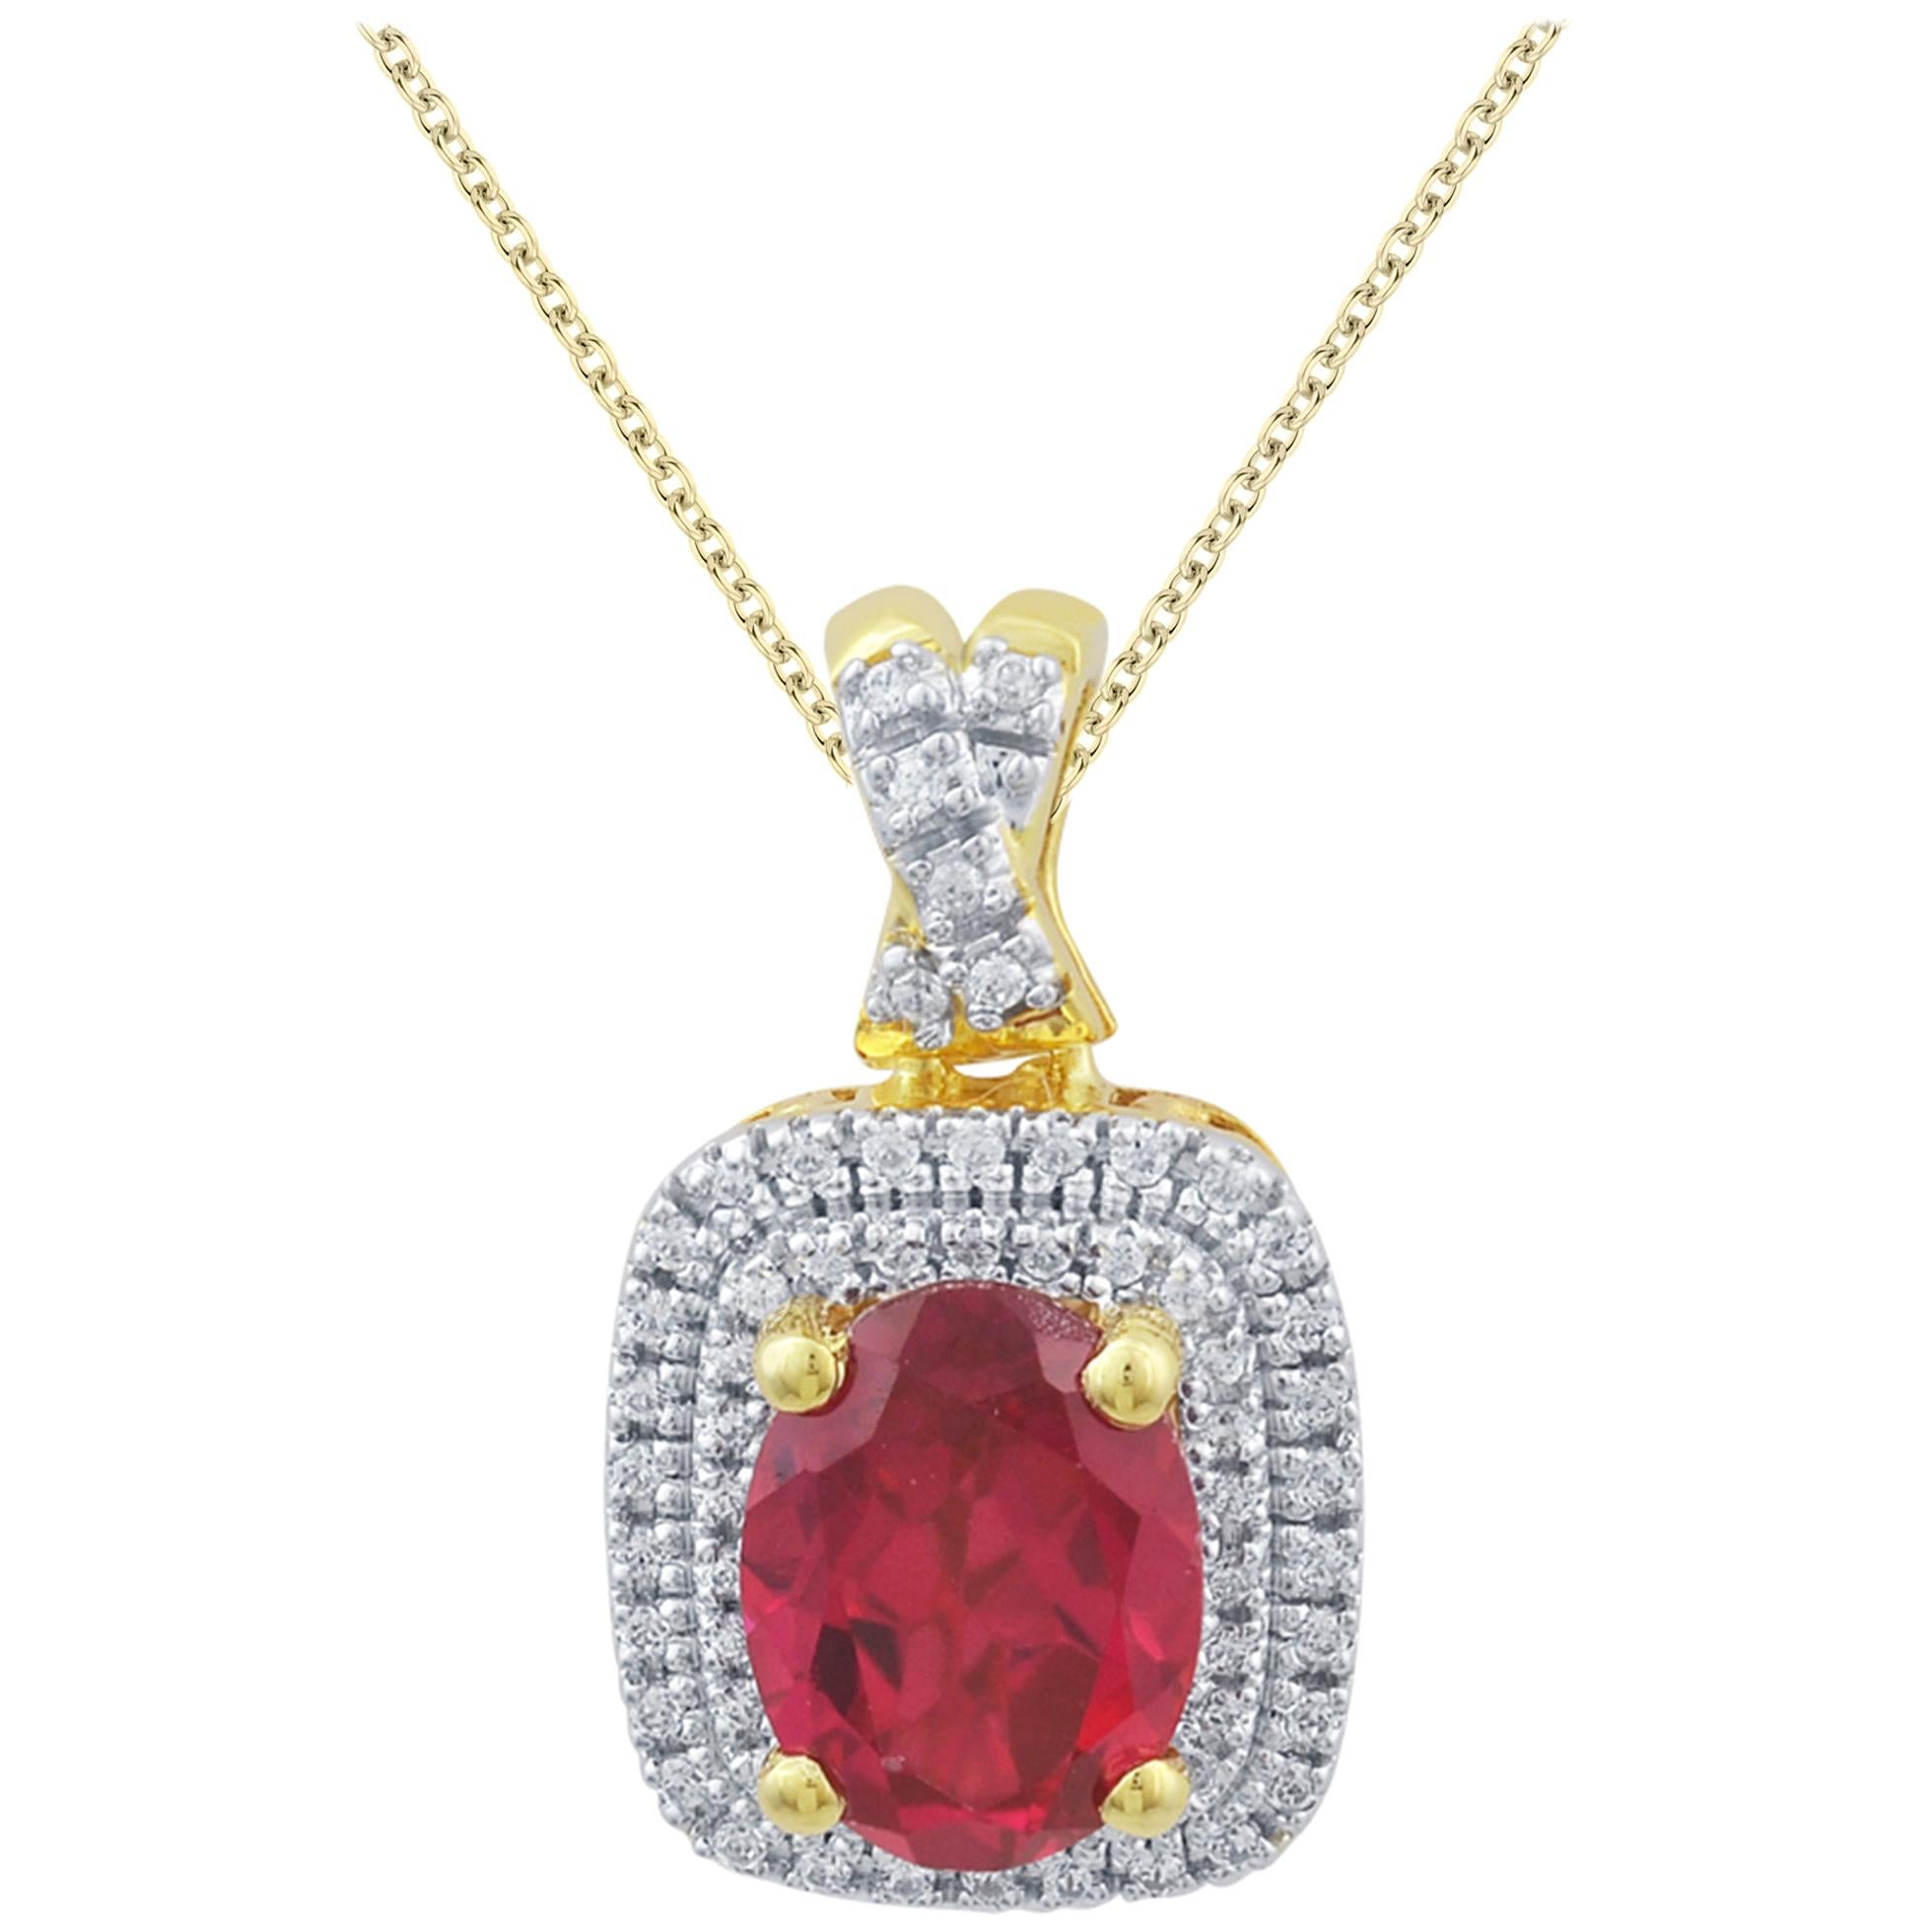 TJD 0.15 Carat Diamond and 8X6MM Oval Ruby 14 Karat Yellow Gold Halo Pendant For Sale